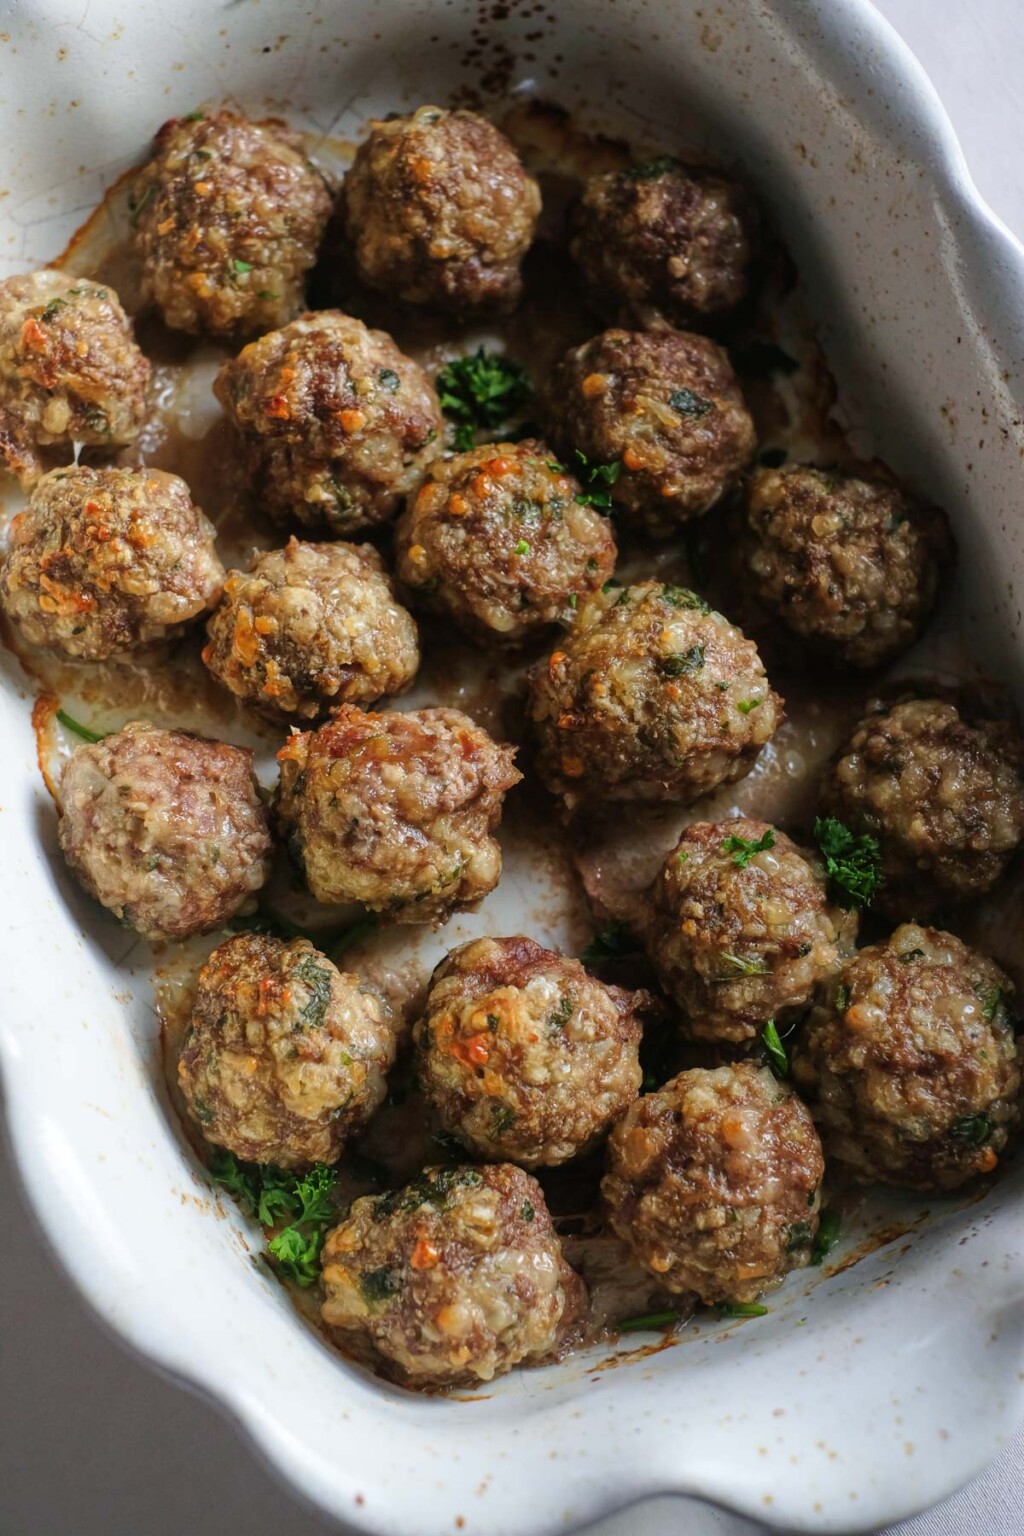 How To Bake Meatballs In The Oven - Recipes From A Pantry